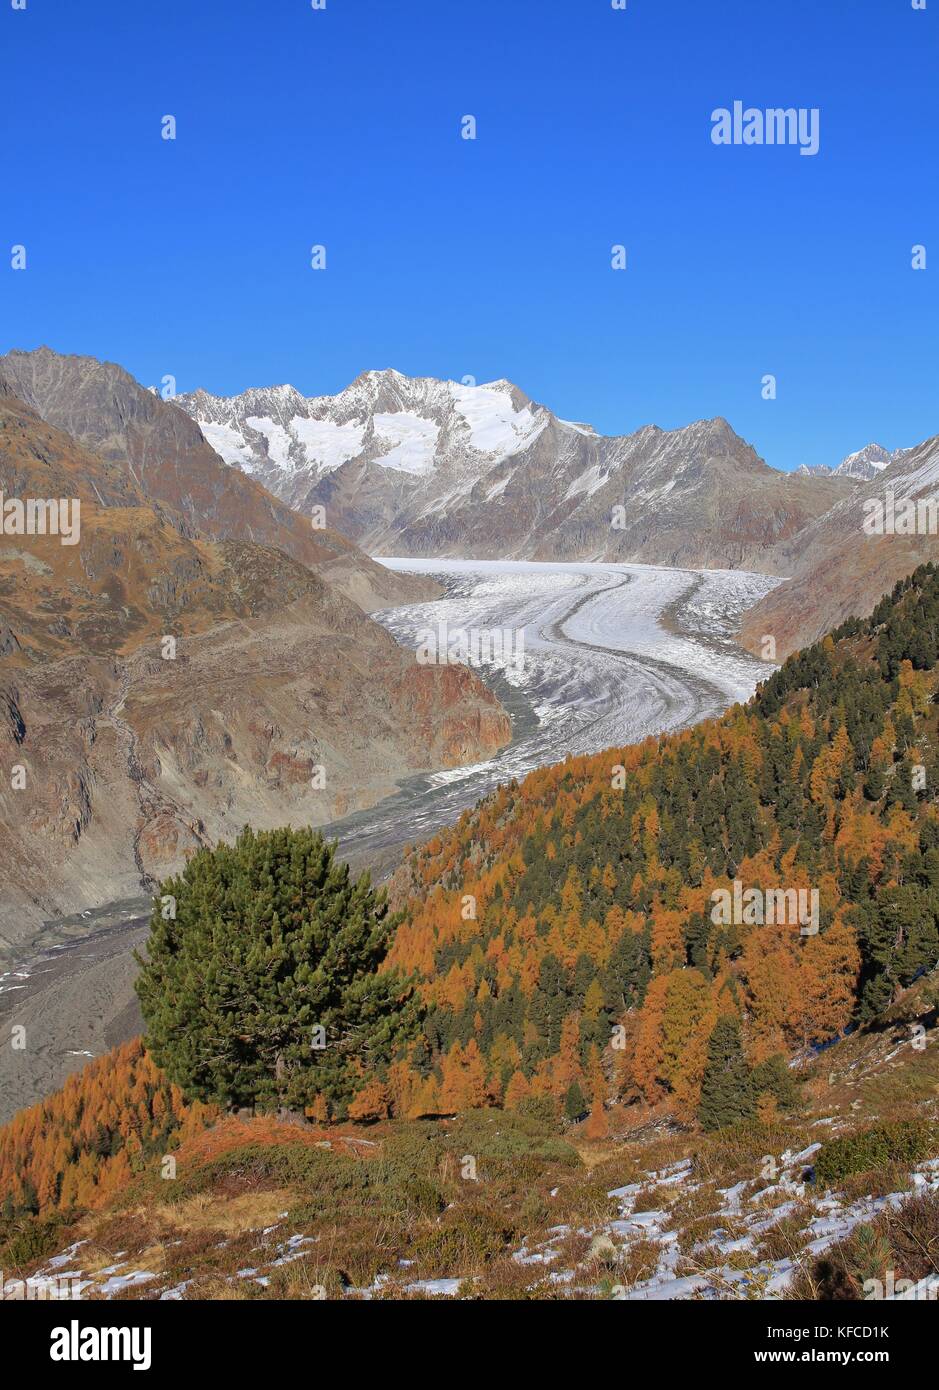 Autumn scene in Valais, Switzerland. Colorful forest, Aletsch glacier and mountains. Stock Photo